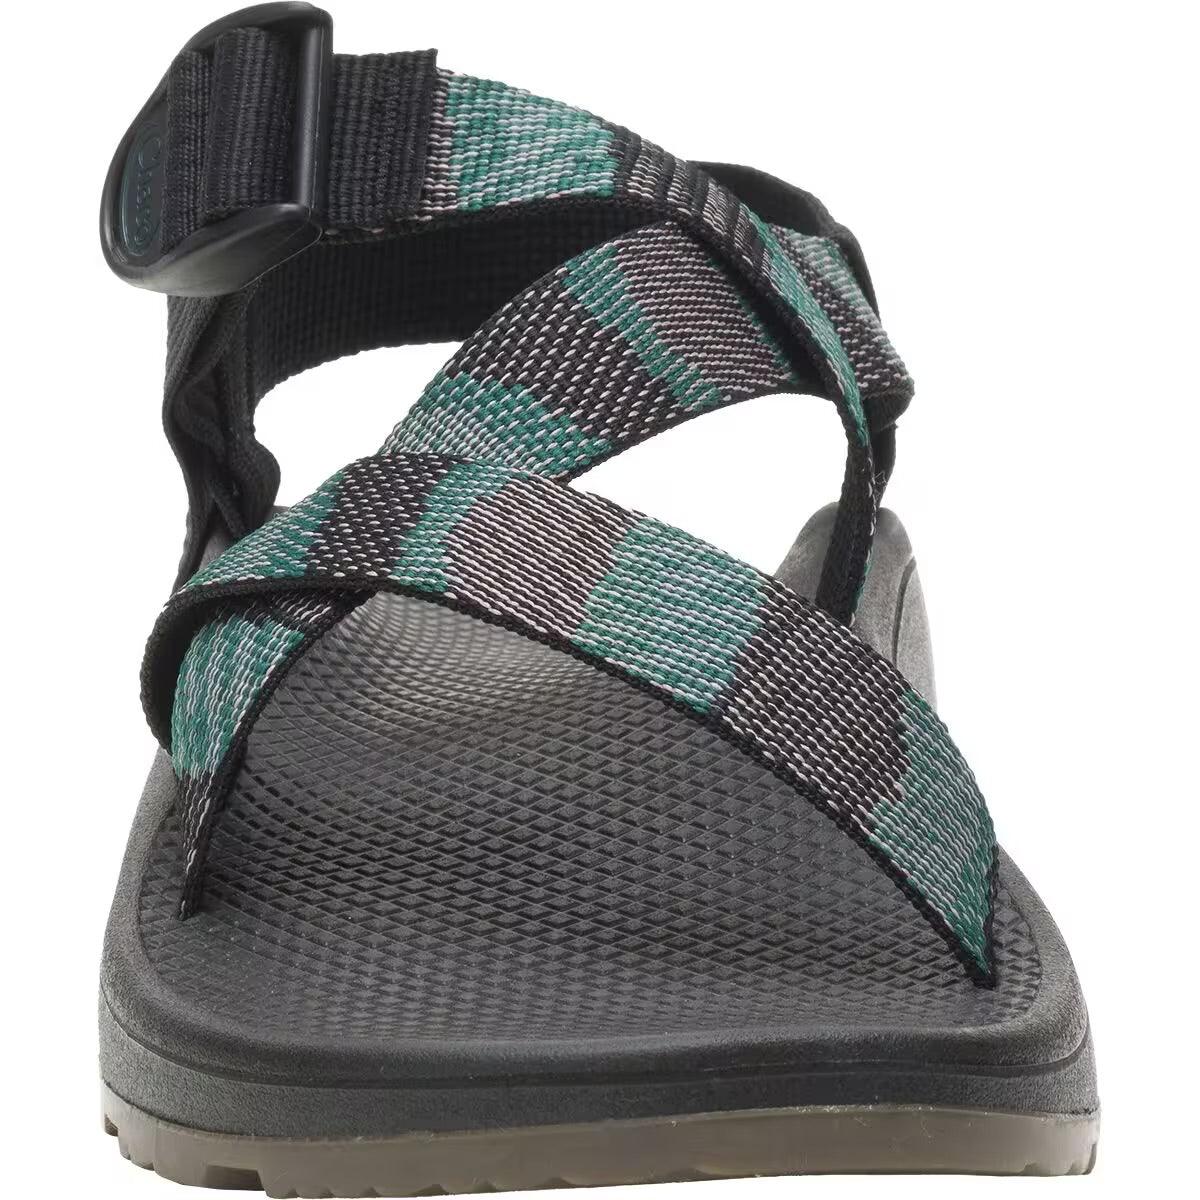 Chaco - Chaco Men’s Z/Cloud Sandal - The Shoe Collective